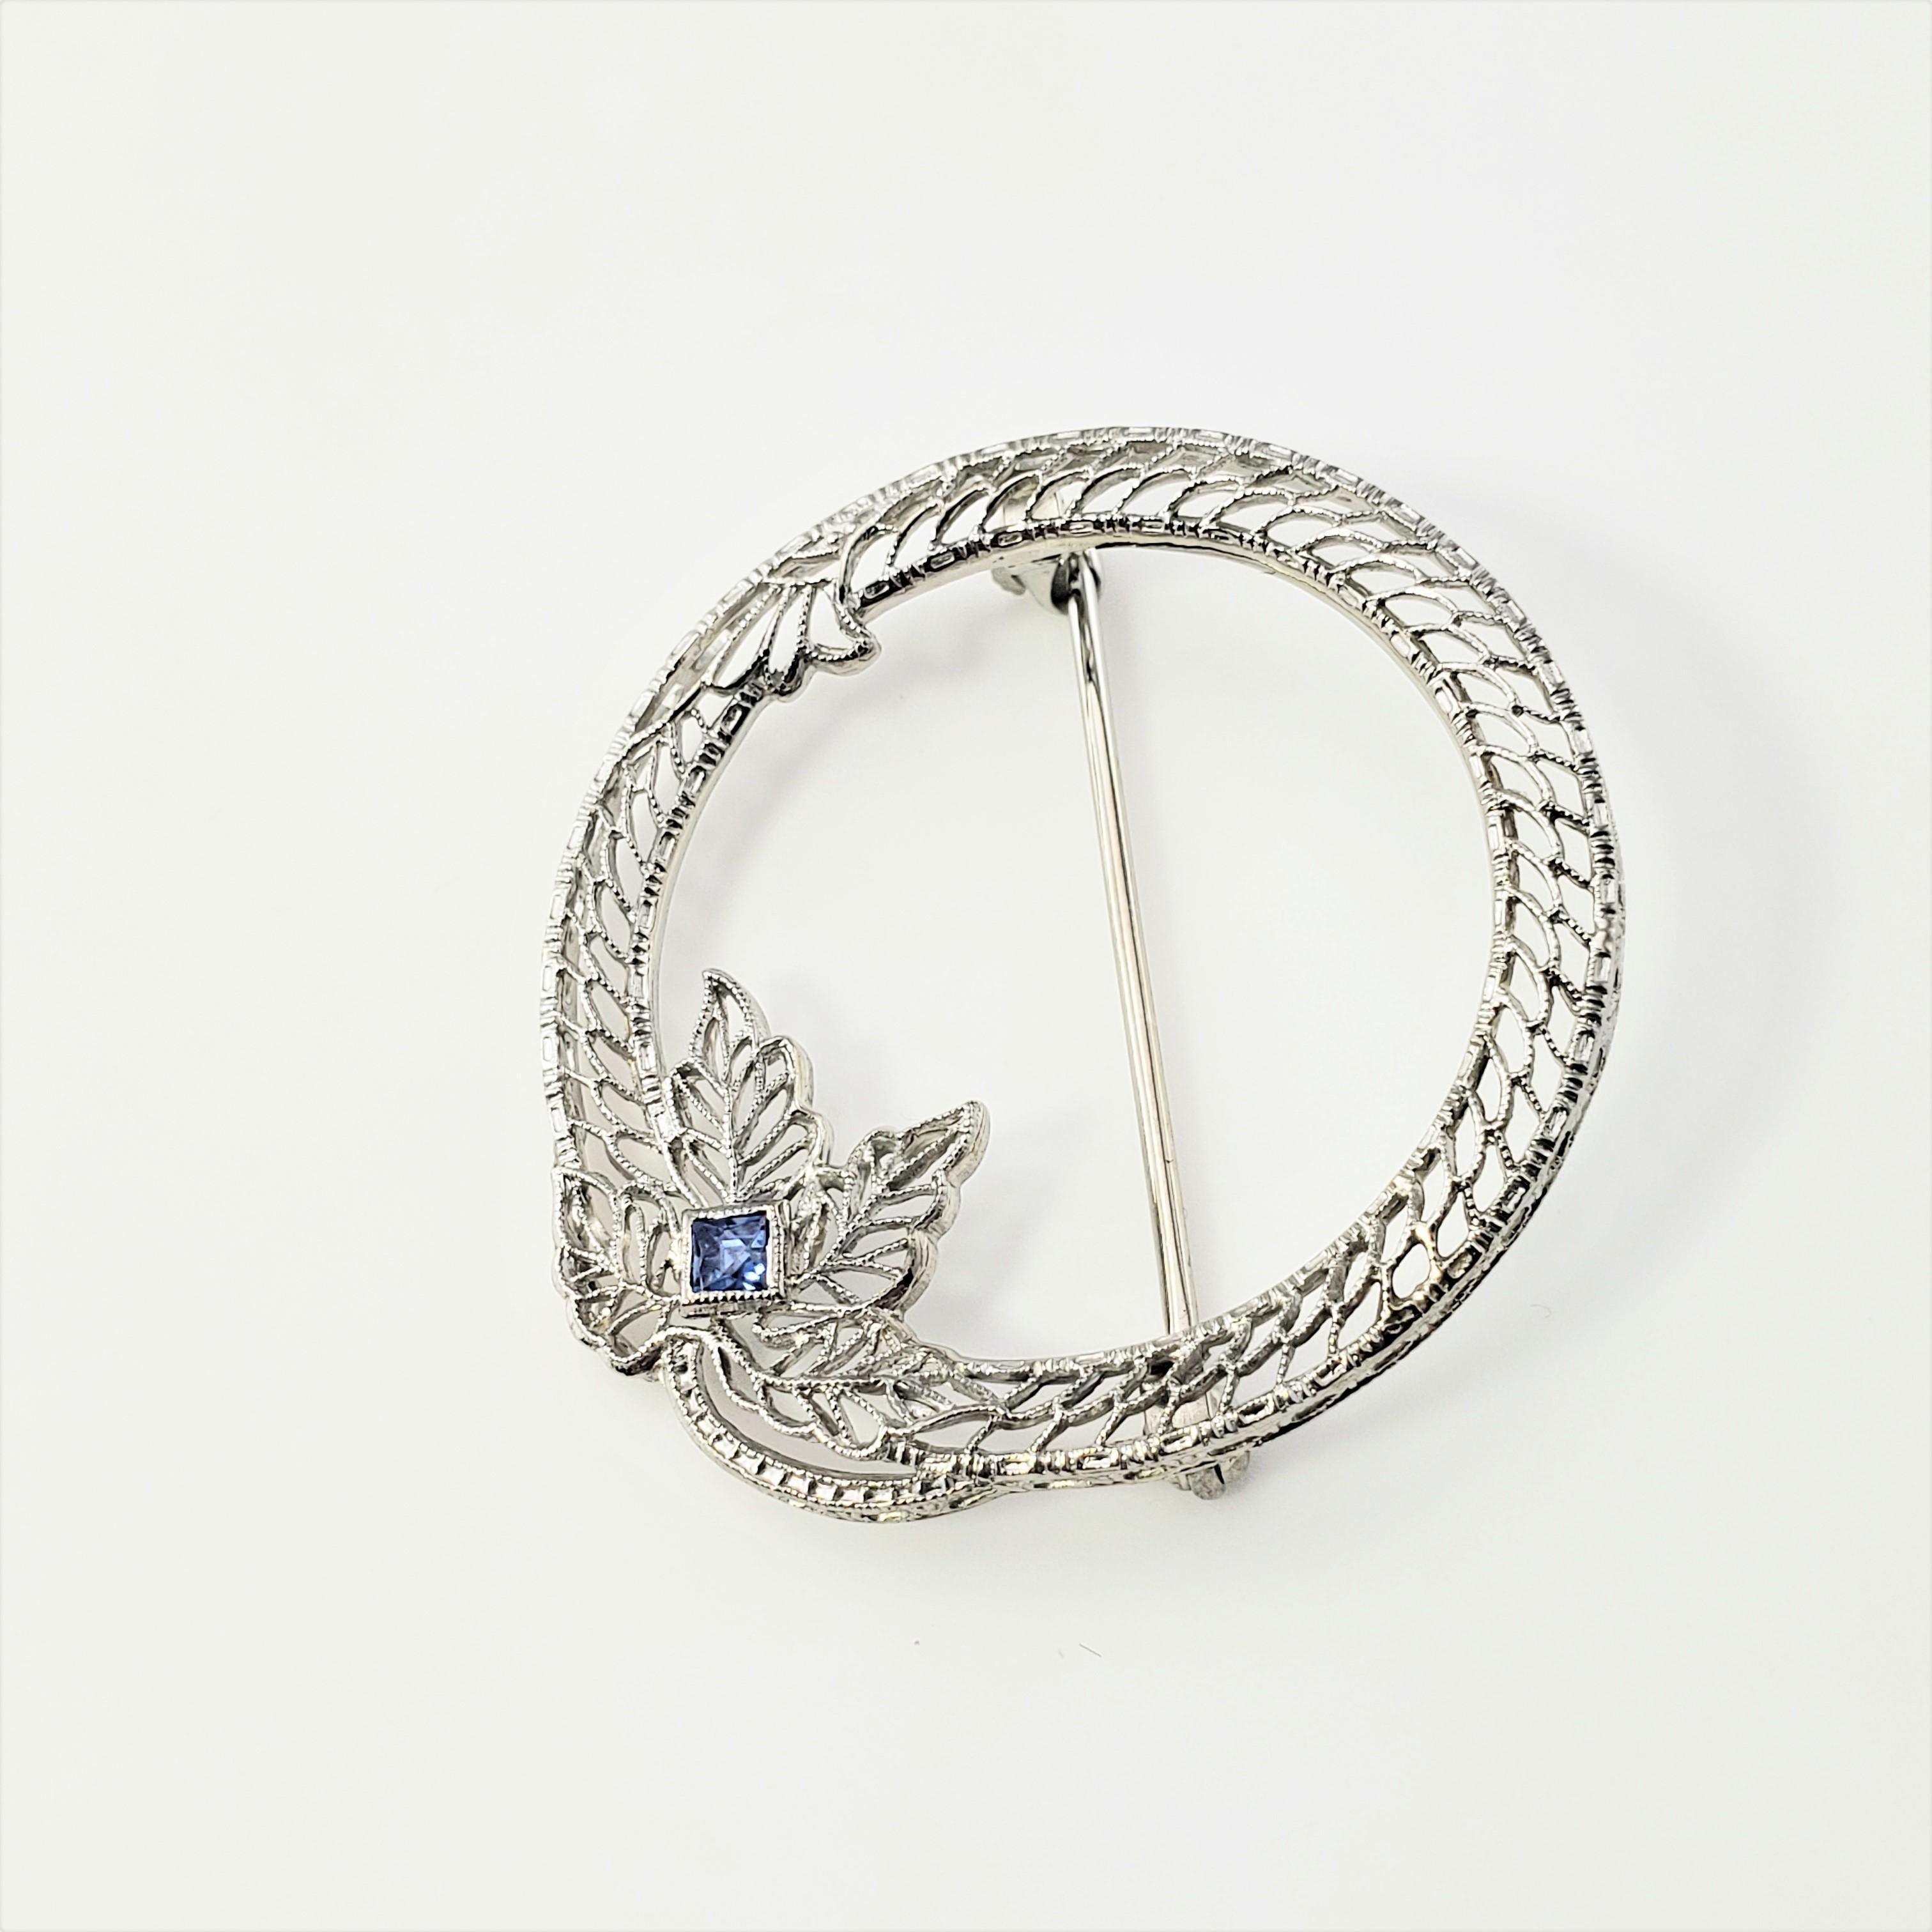 14 Karat White Gold Filigree Brooch/Pin-

This lovely brooch is crafted in delicate 14K white gold filigree and accented with one square blue sapphire.

Size:  31 mm  x 29  mm  

Weight:   1.7 dwt. /  2.7 gr.

Stamped: 14K

Very good condition,